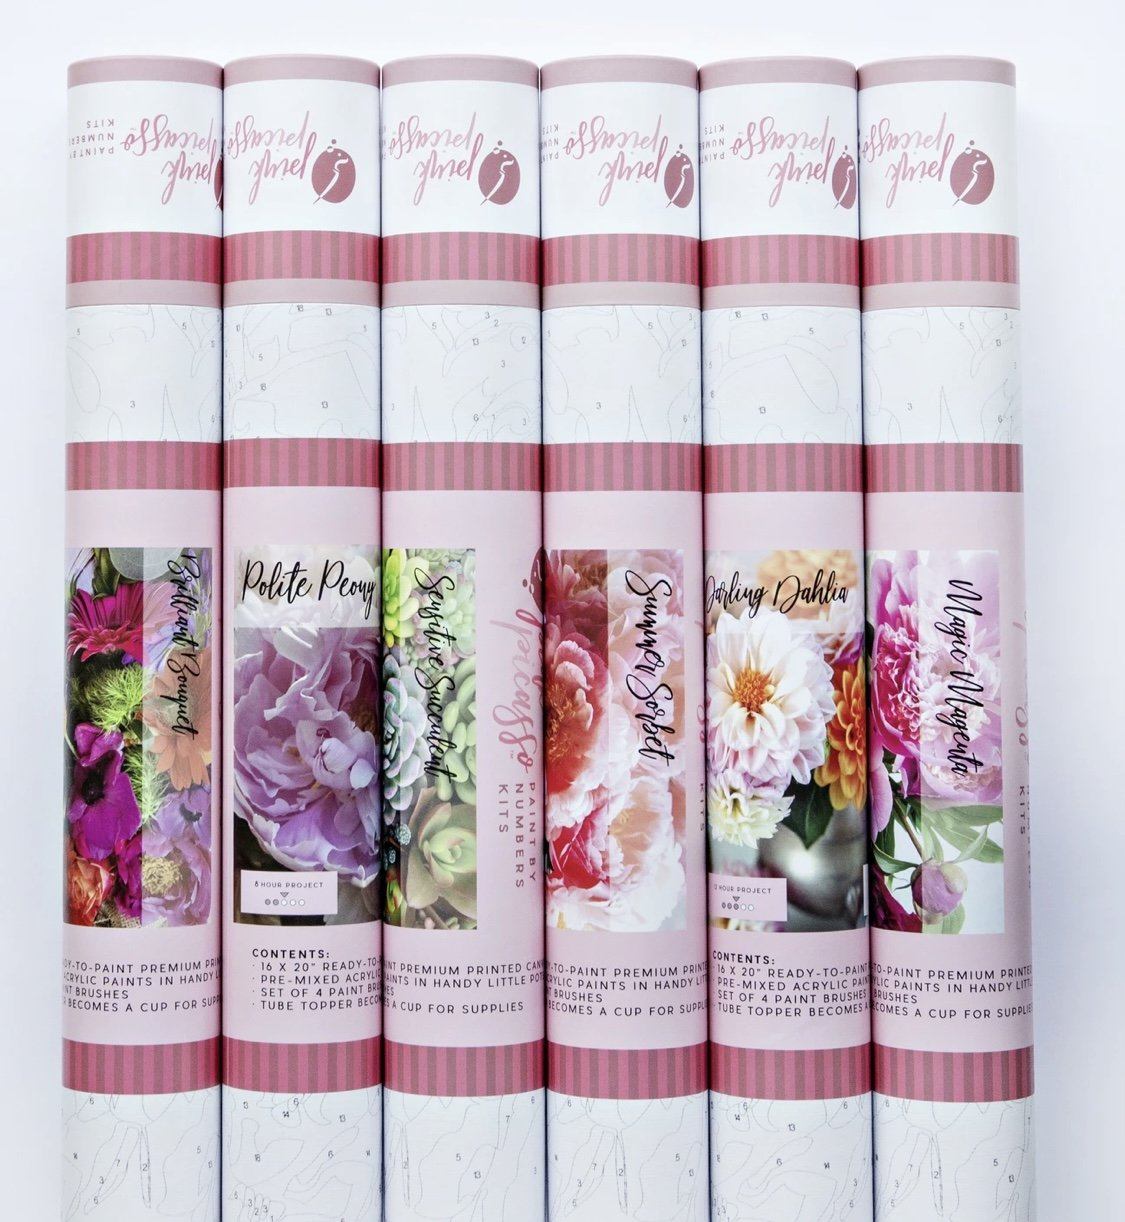 Pink Picasso PAINT BY NUMBERS KIT, Darling Dahlia Flowers, New in Tube